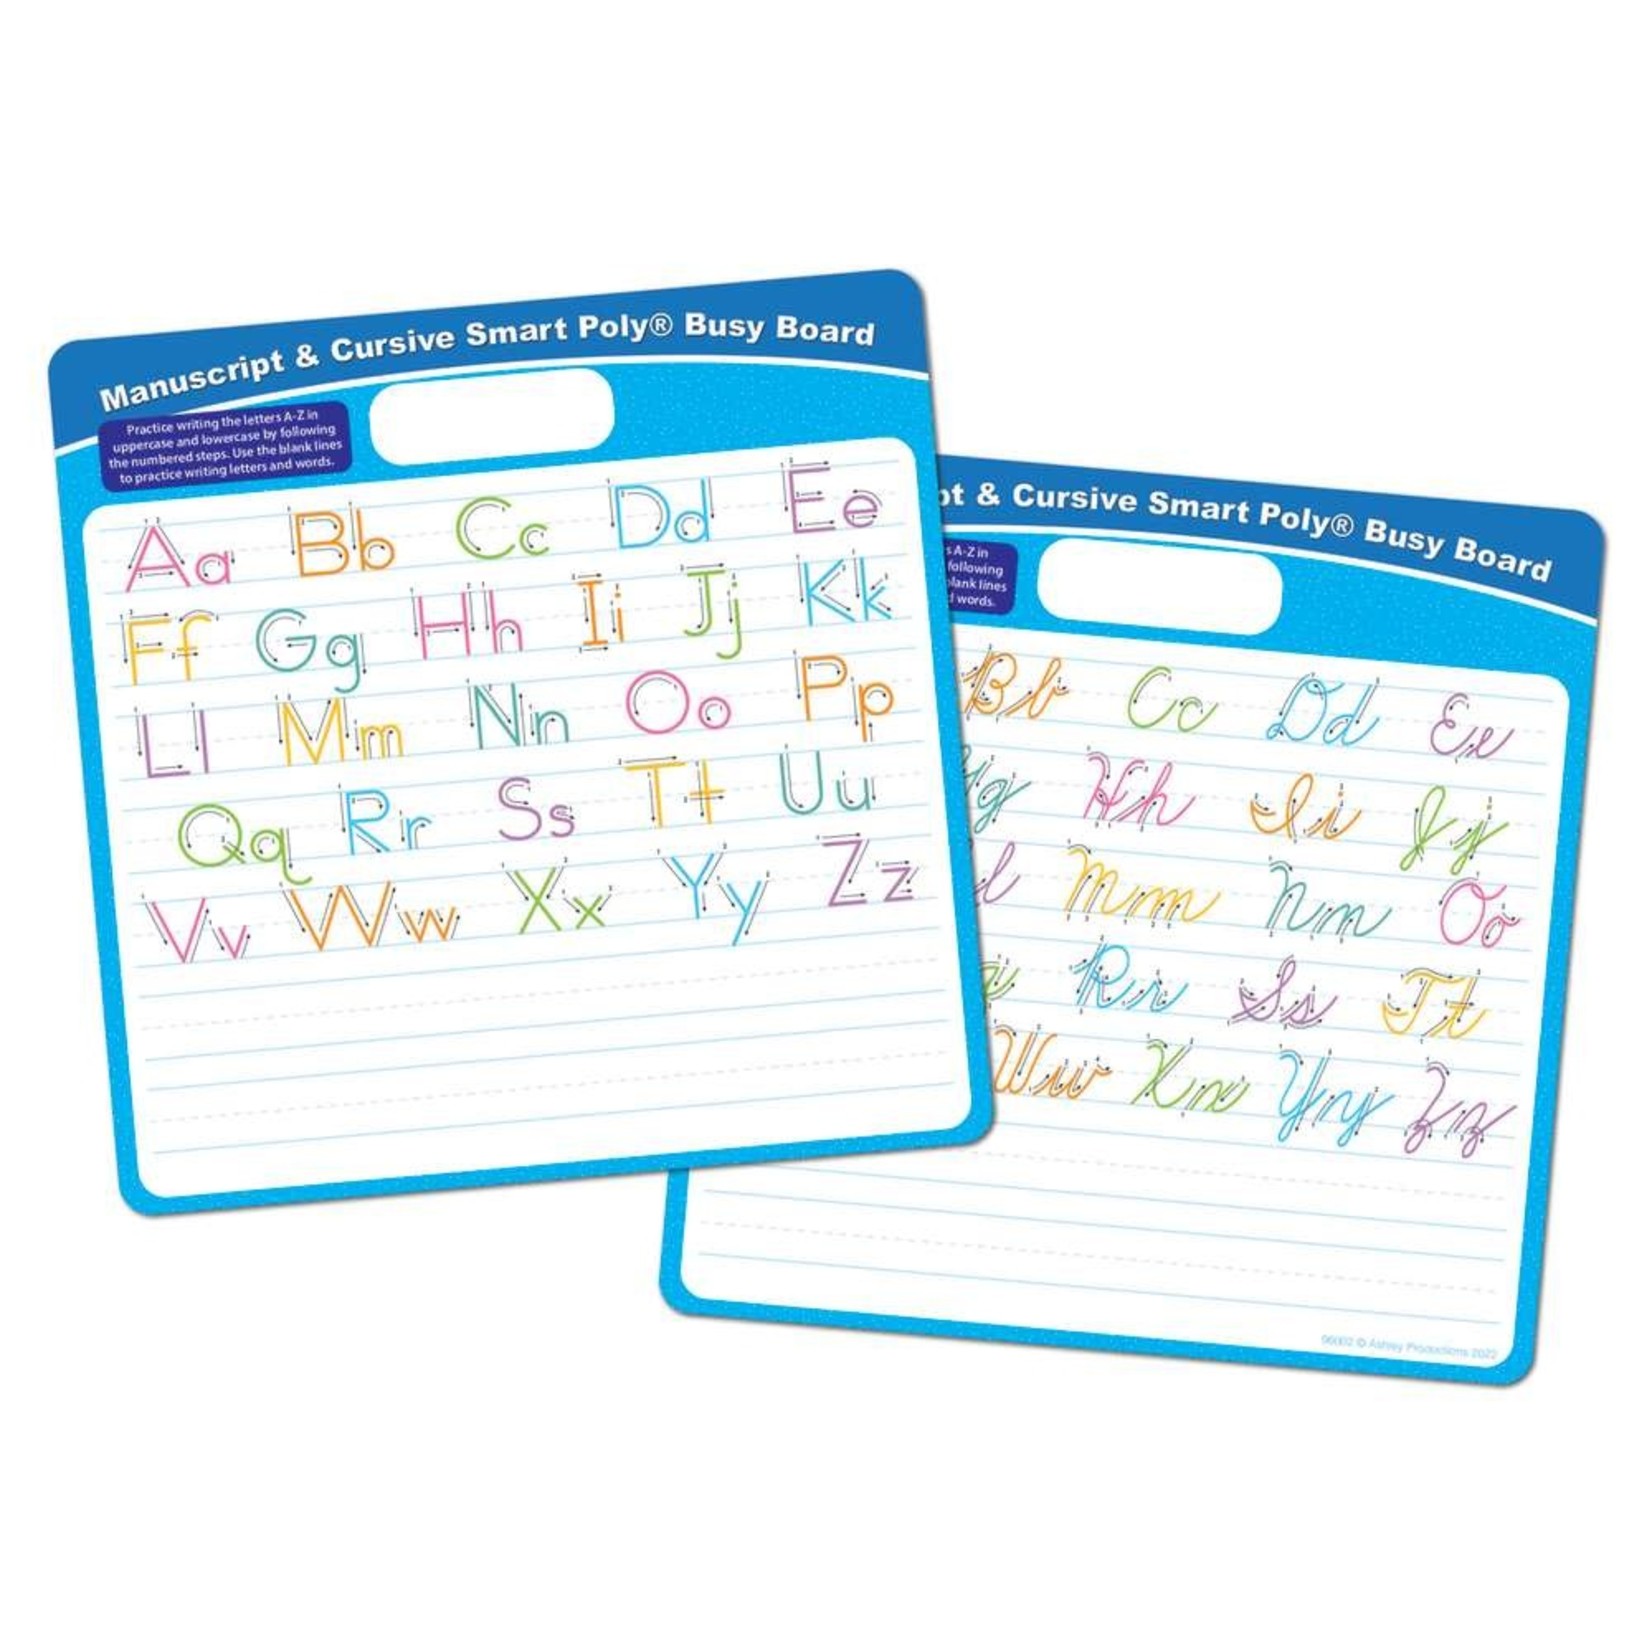 ASHLEY INCORPORATED Smart Poly® Busy Boards, Manuscript/Cursive